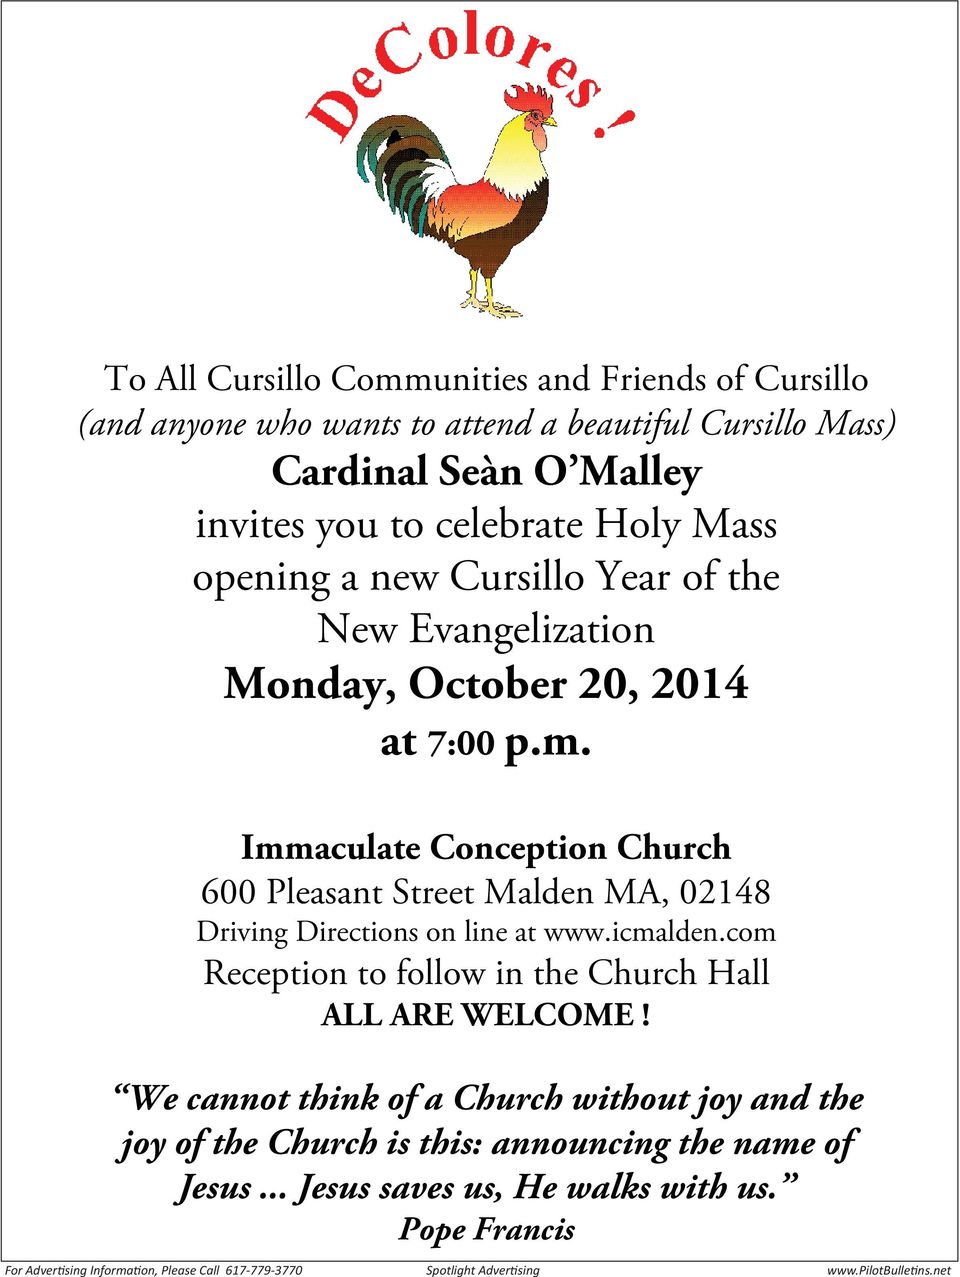 Immaculate Conception Church 600 Pleasant Street Malden MA, 02148 Driving Directions on line at www.icmalden.com Reception to follow in the Church Hall ALL ARE WELCOME!